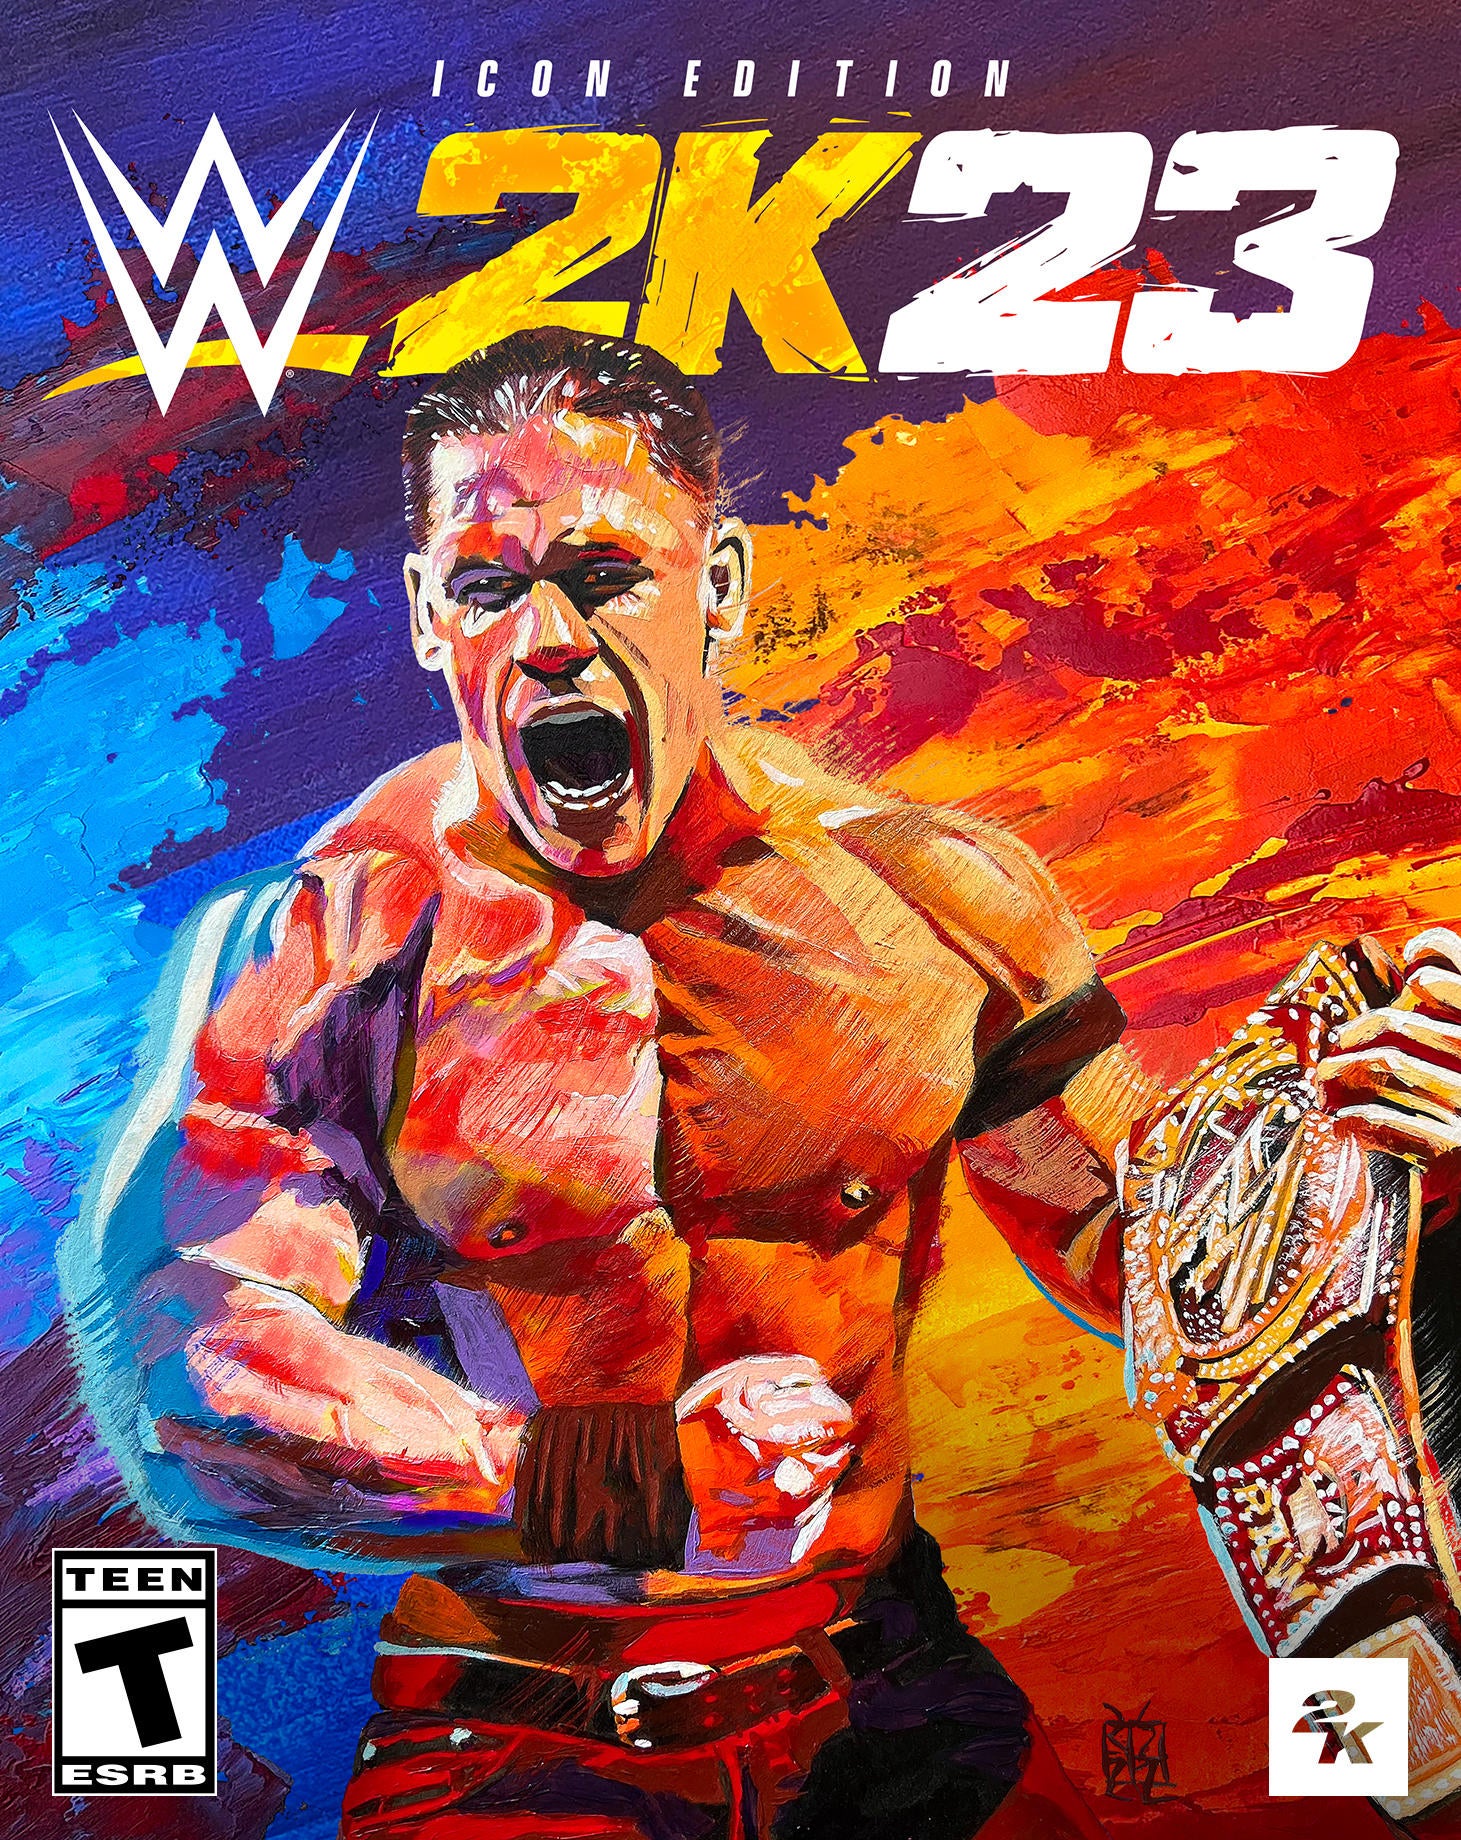 WWE 2K23 Reveals New Game Mode, First Images, and More